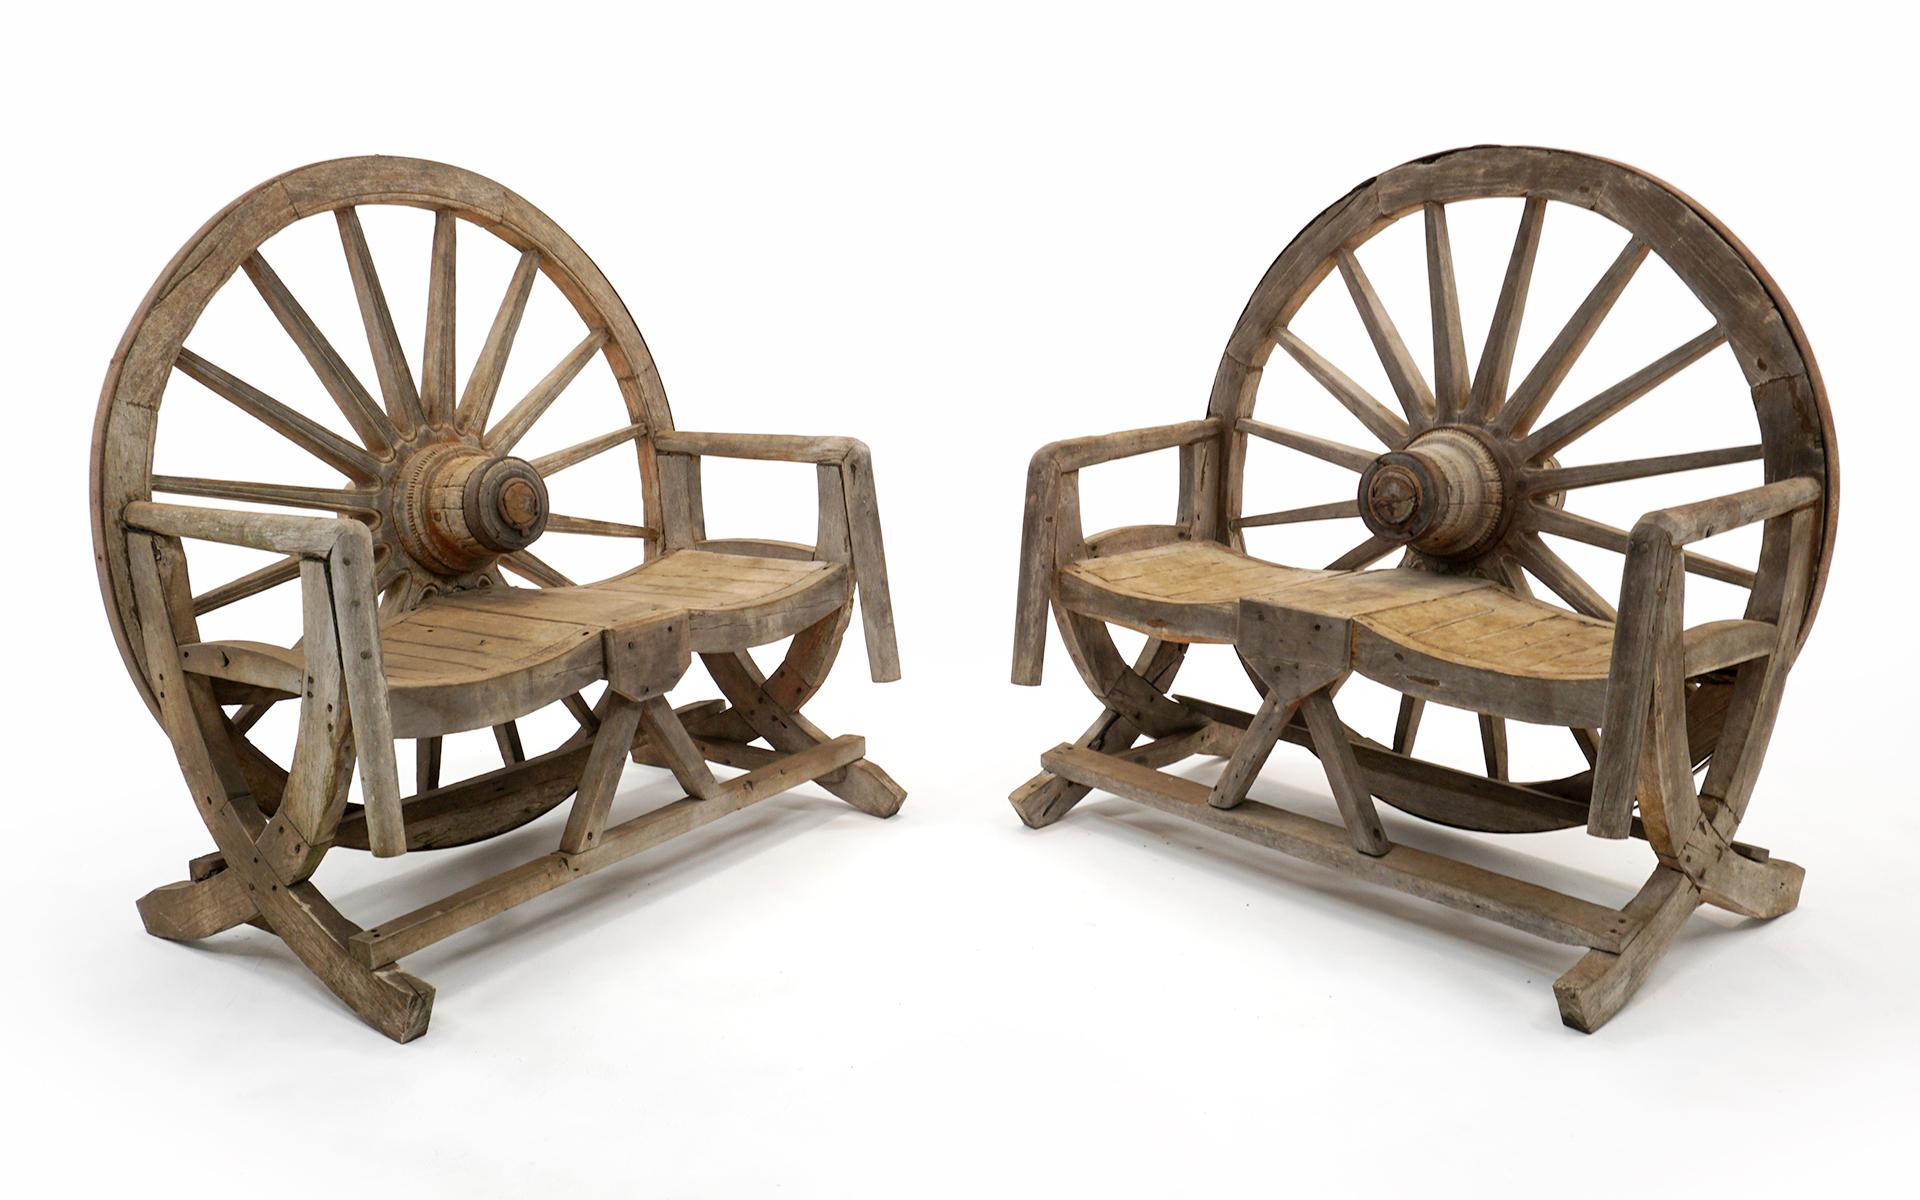 Two rustic wagon wheel love seat / settees in very good original condition. Made from actual antique wagon wheels. Both are very sound structurally and ready to use. The wood has an attractive worn appearance.